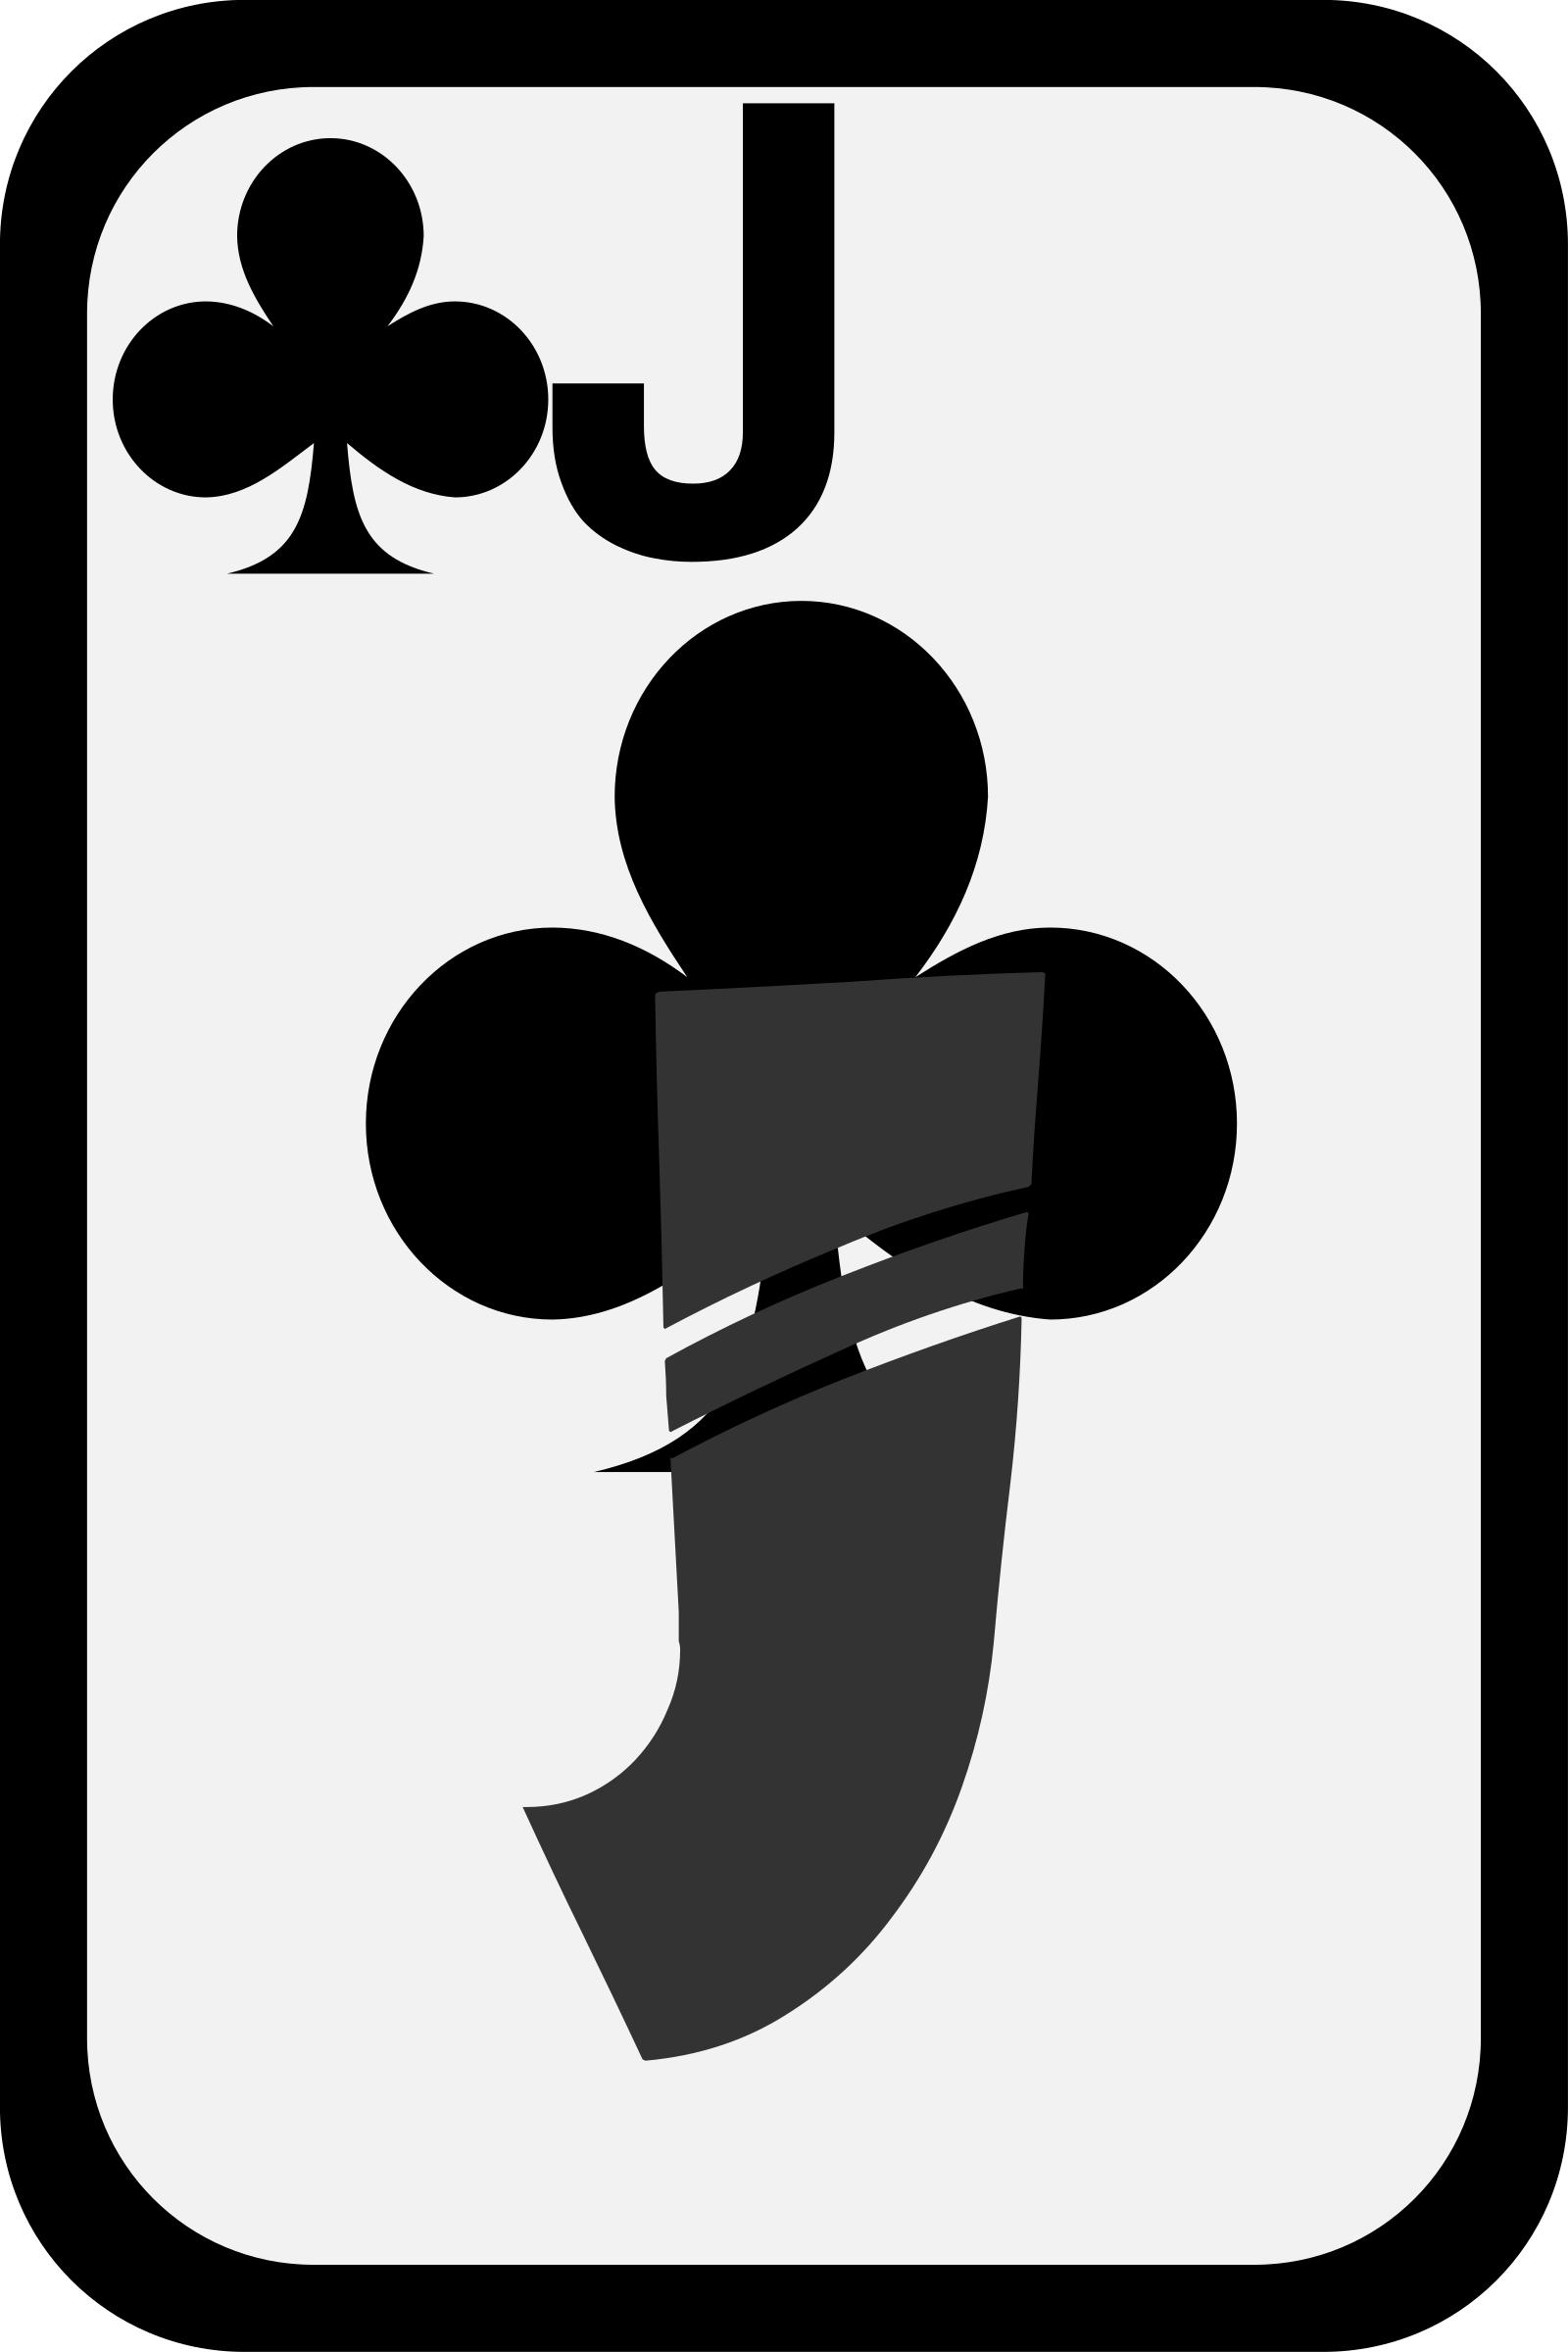 Jack of Clubs PNG icons